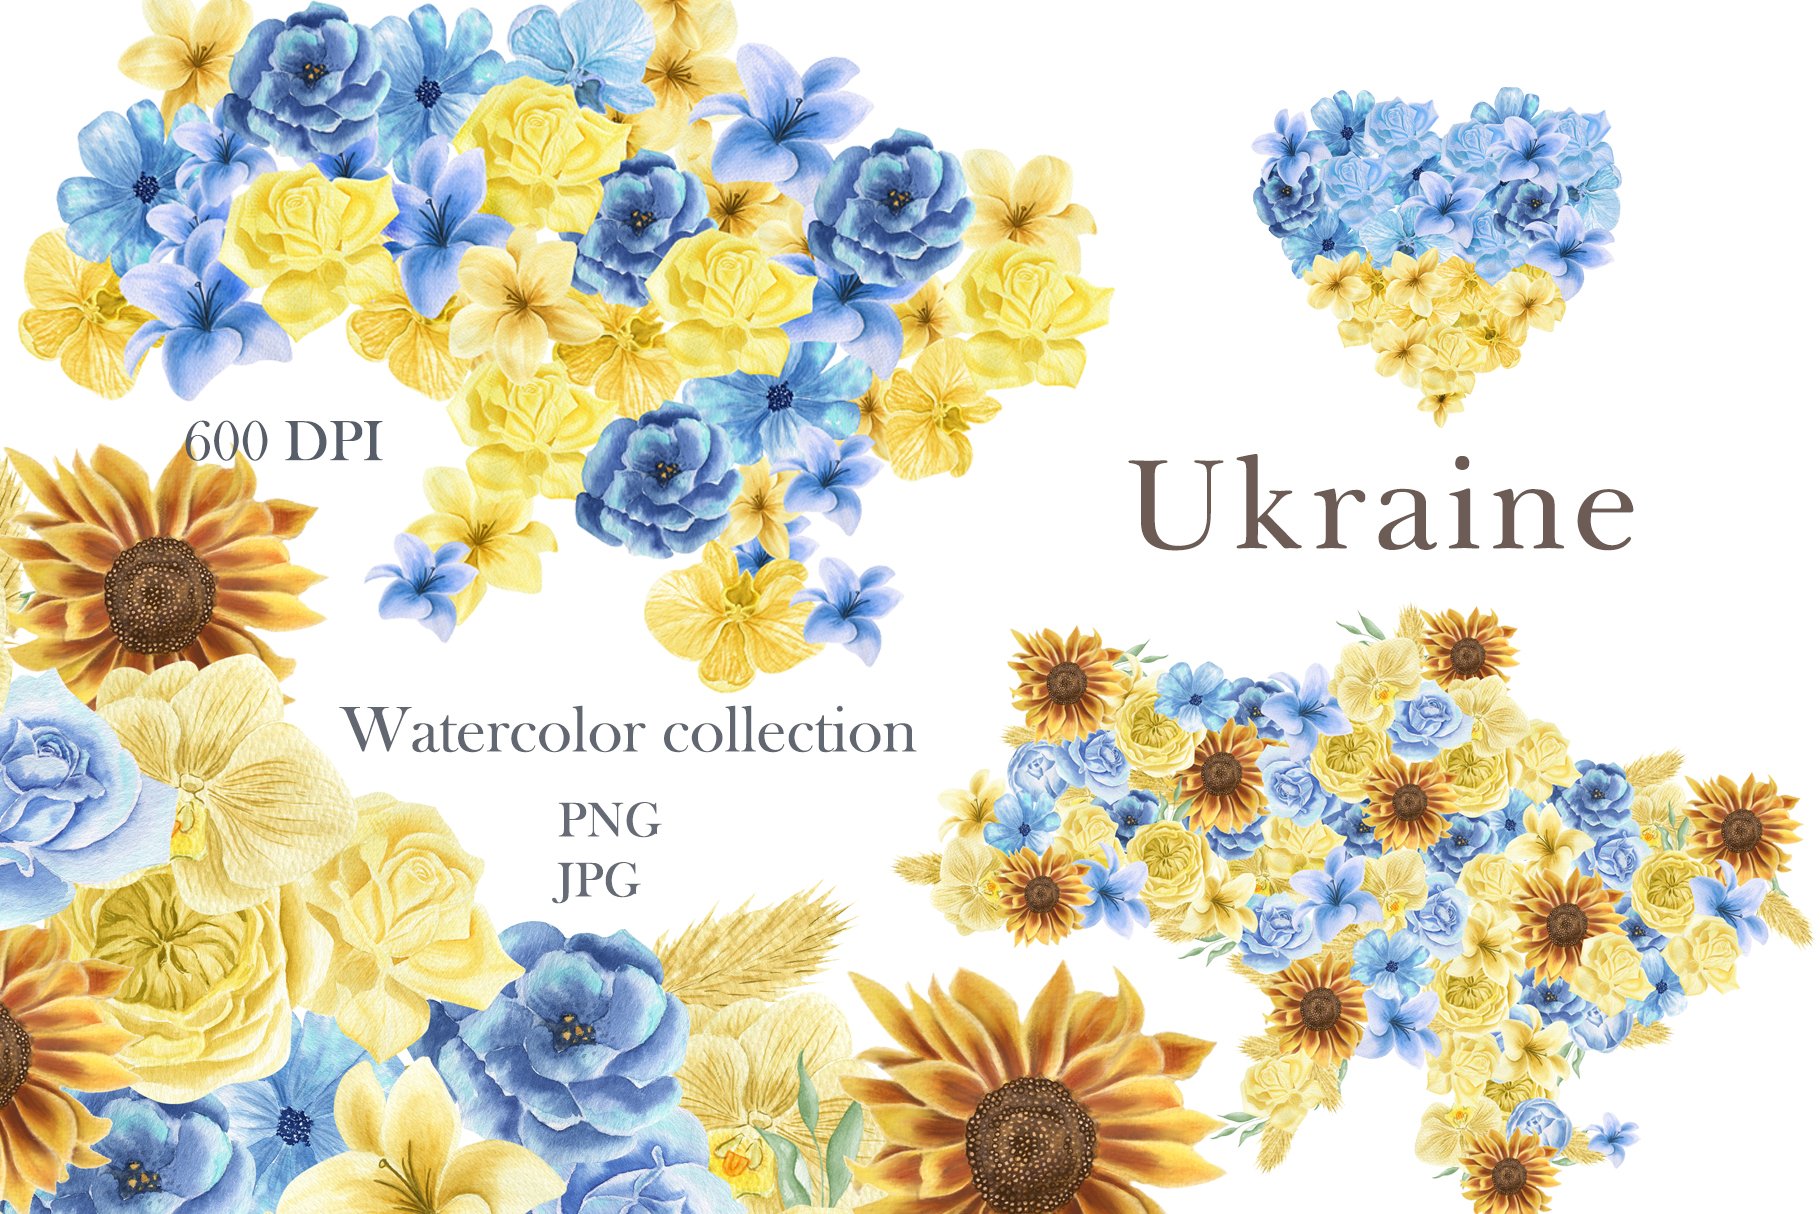 Ukraine watercolor flower collection cover image.